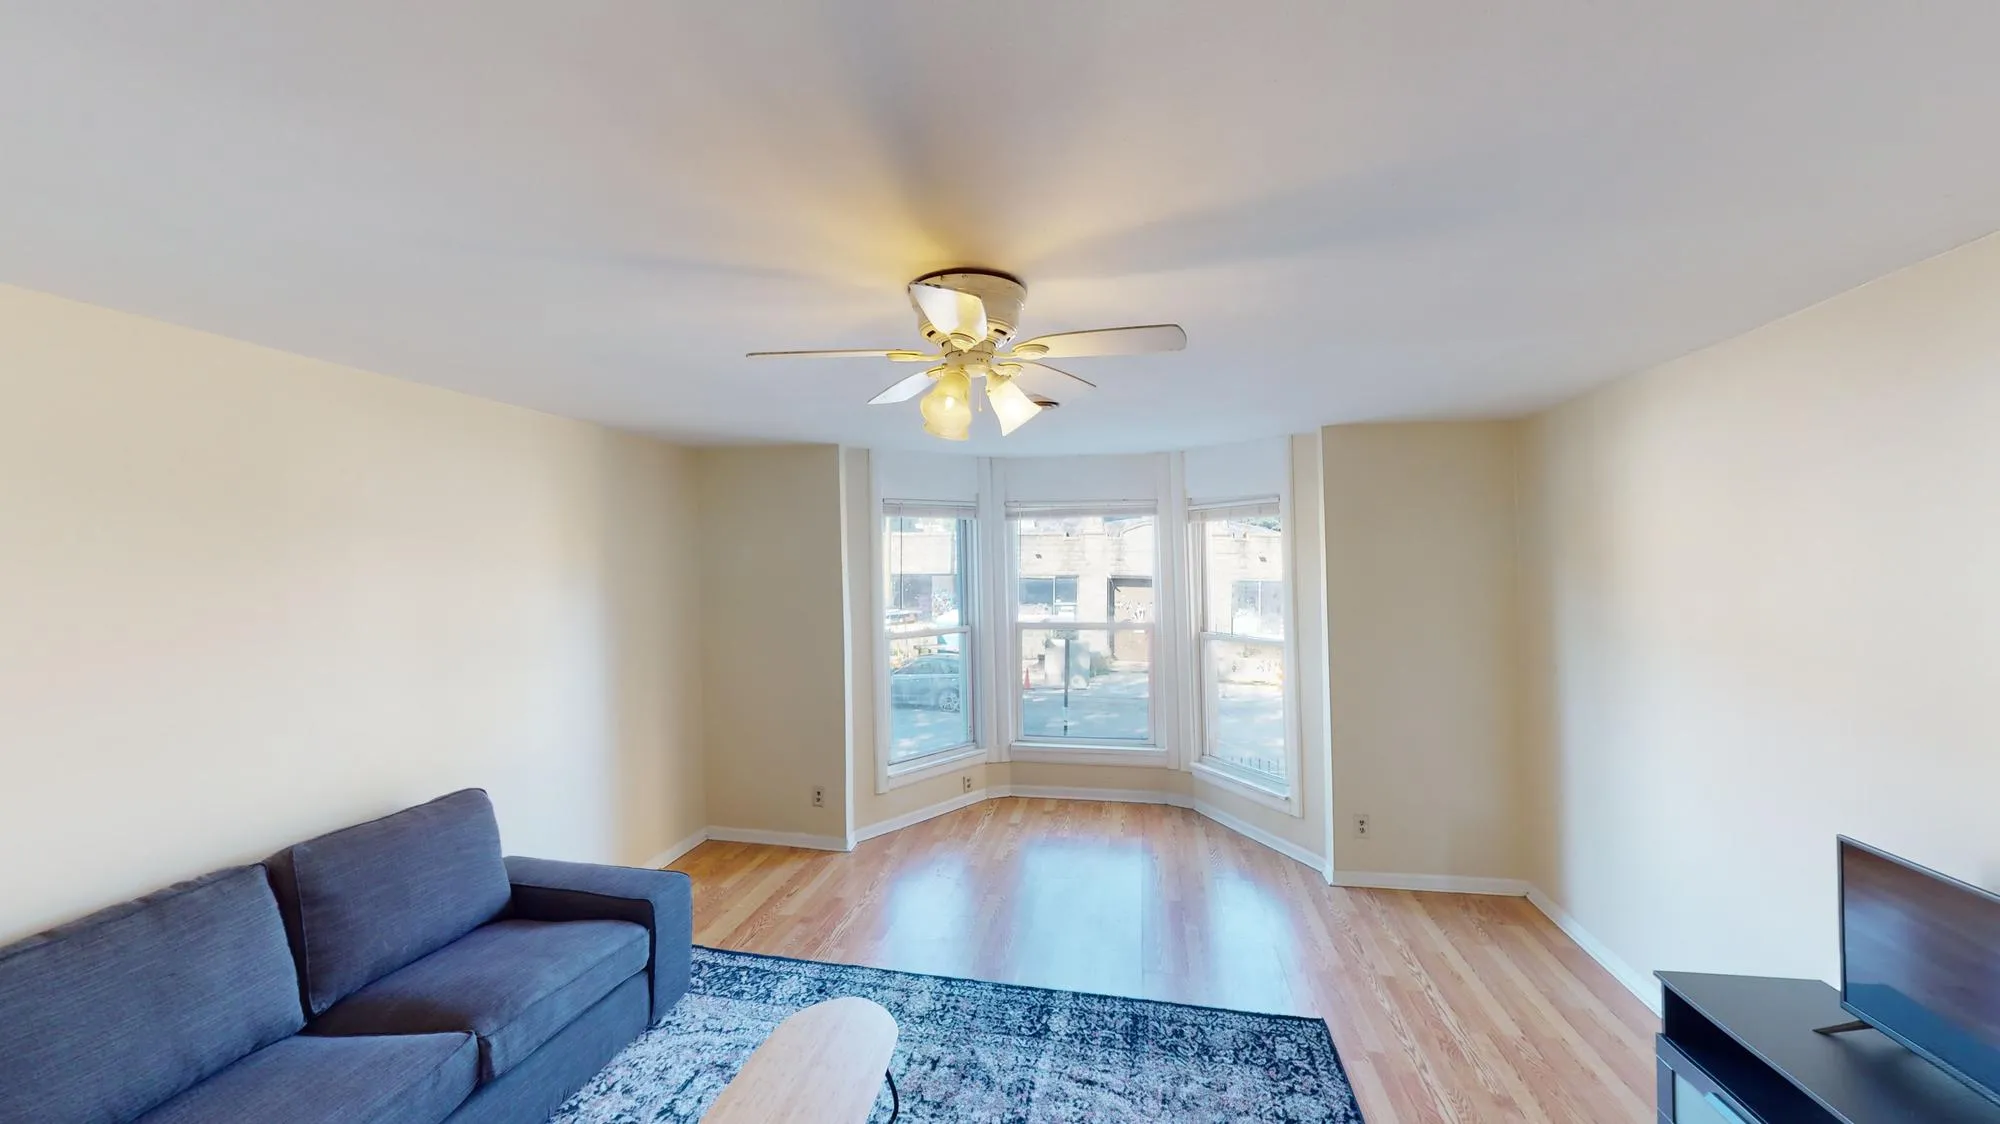 2619 N CALIFORNIA AVE 60647-Room For Rent-unit#002-Chicago-IL